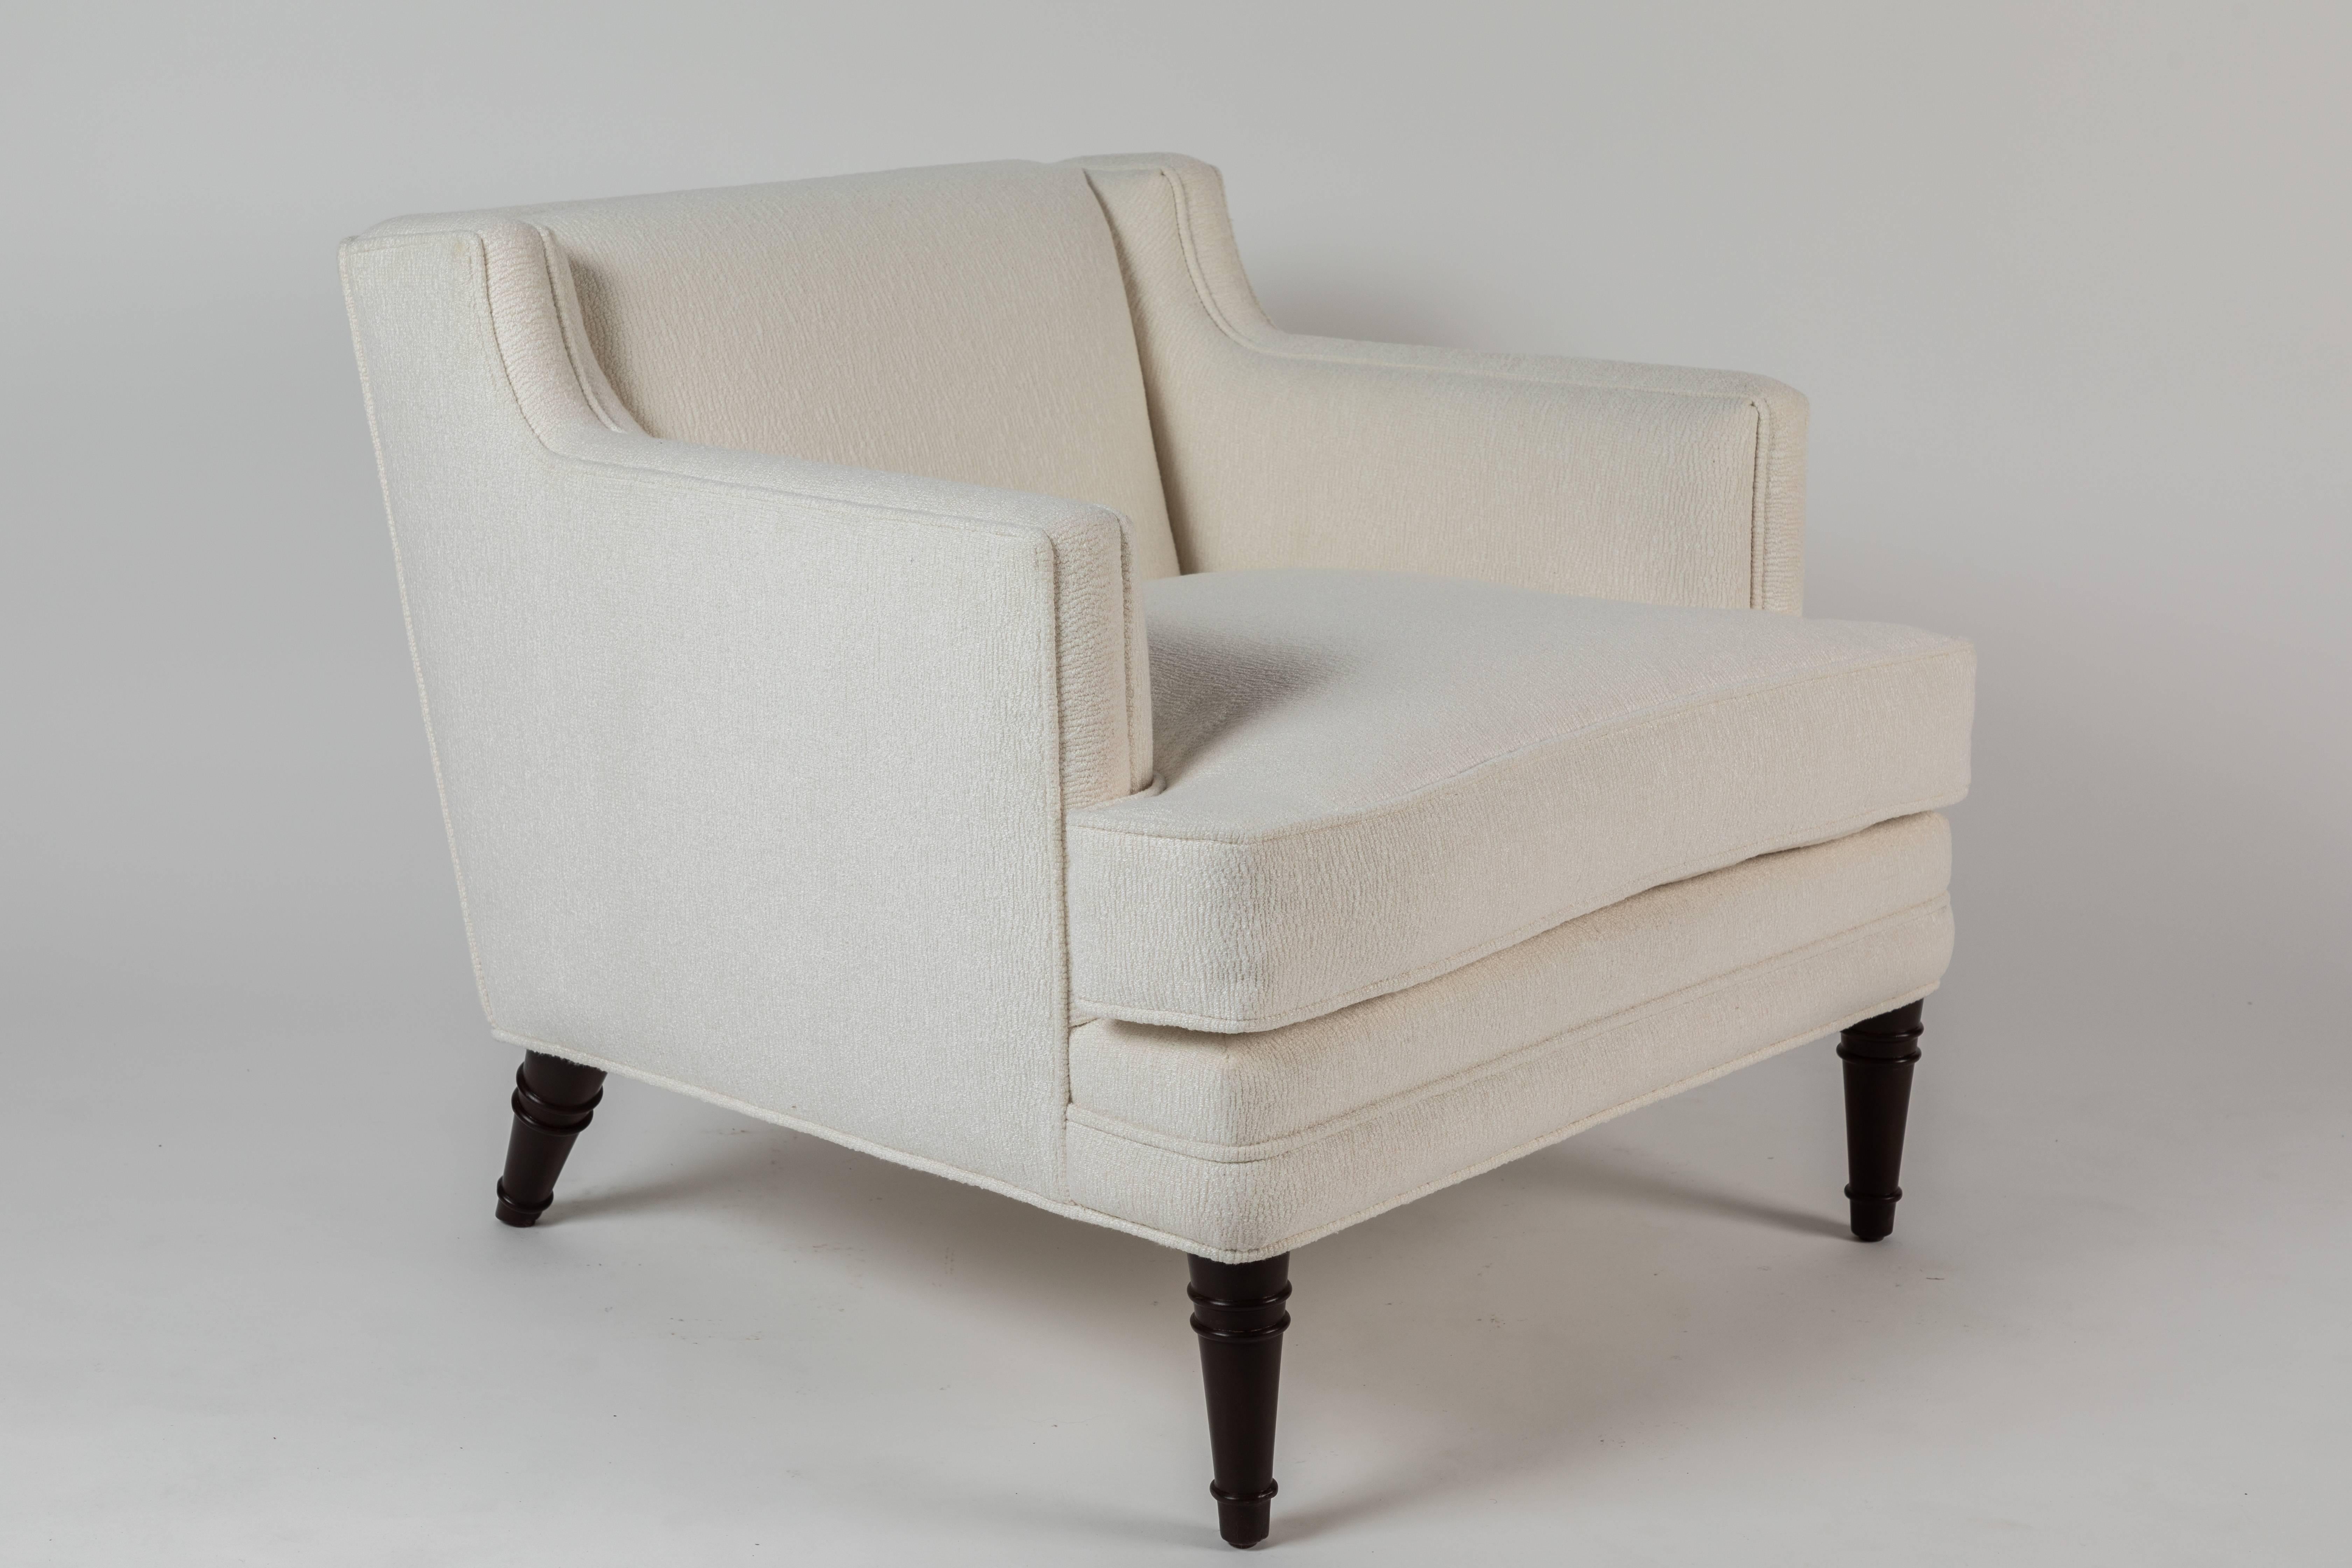 This pair of Seniah chair designed by William Haines features a stylized “bamboo” leg consisting of a ringed conical form on the front and back of the chair. A loose cushion seat add to the overall comfort. The sofa version of this same model was